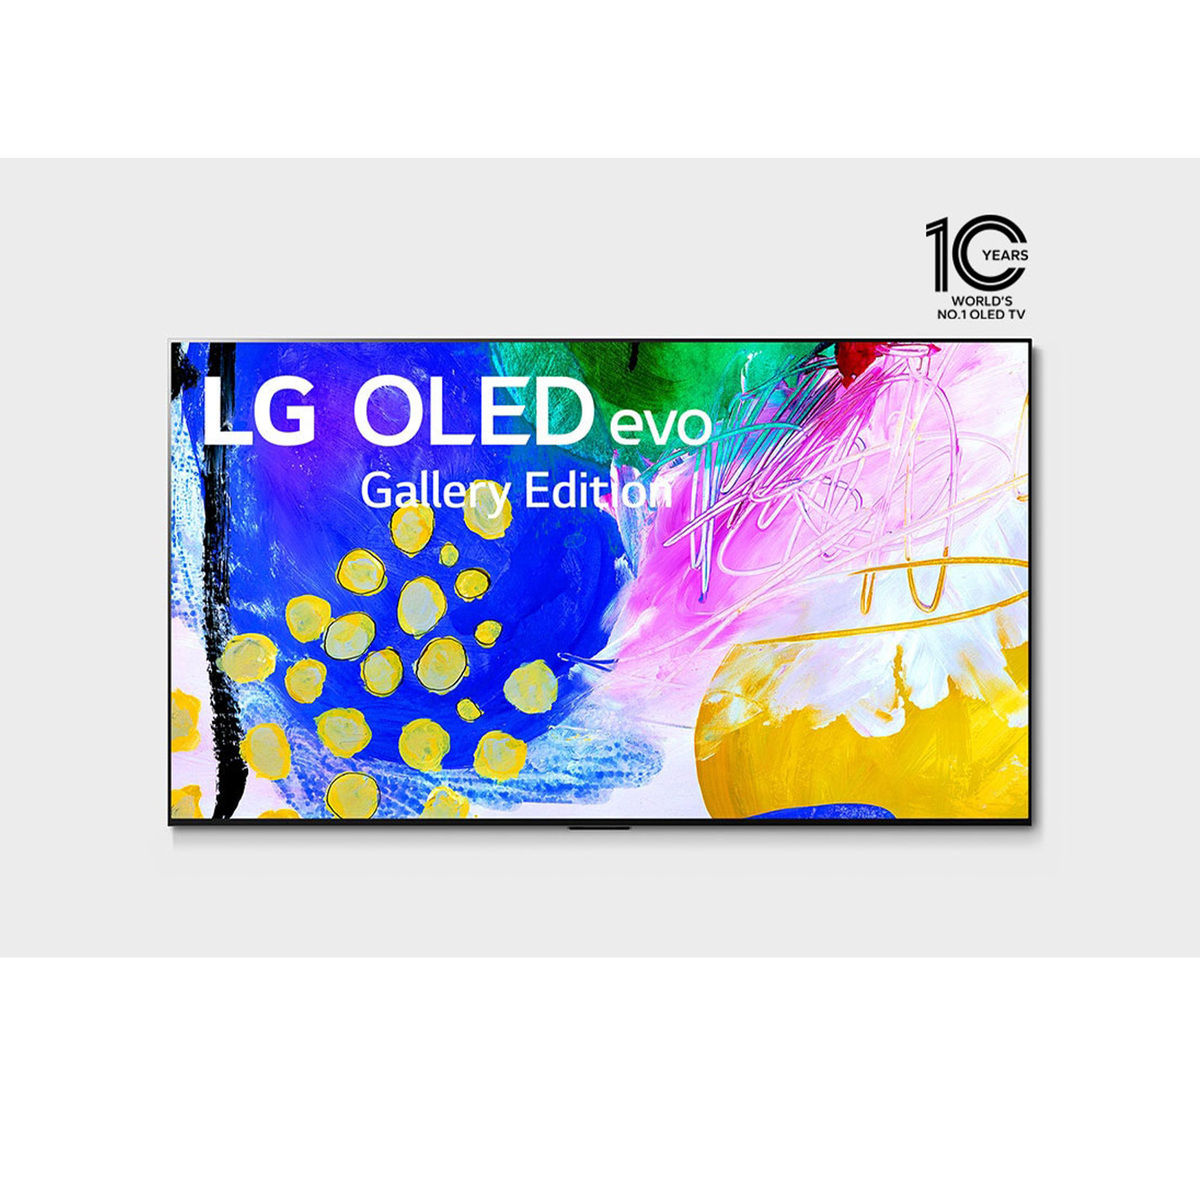 LG CS series OLED TV comes with new processor but without Evo panel –  Homecinema Magazine